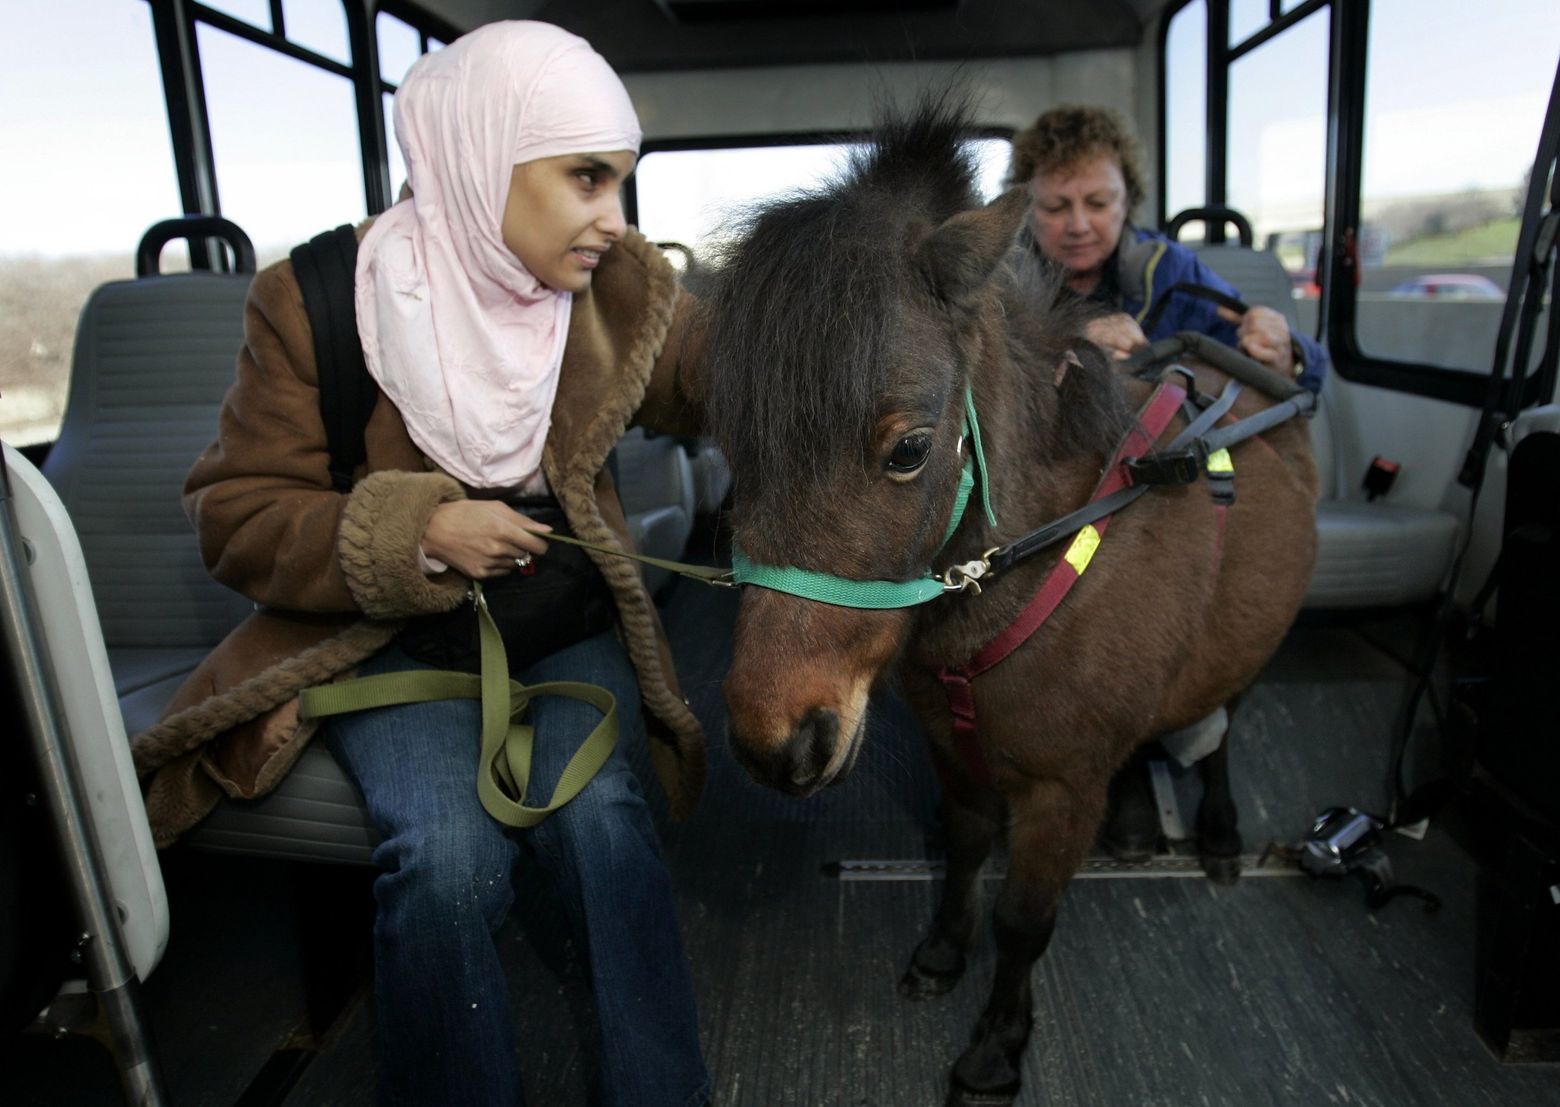 The Completely Reasonable Reason People Are Flying With Mini Horses The Seattle Times